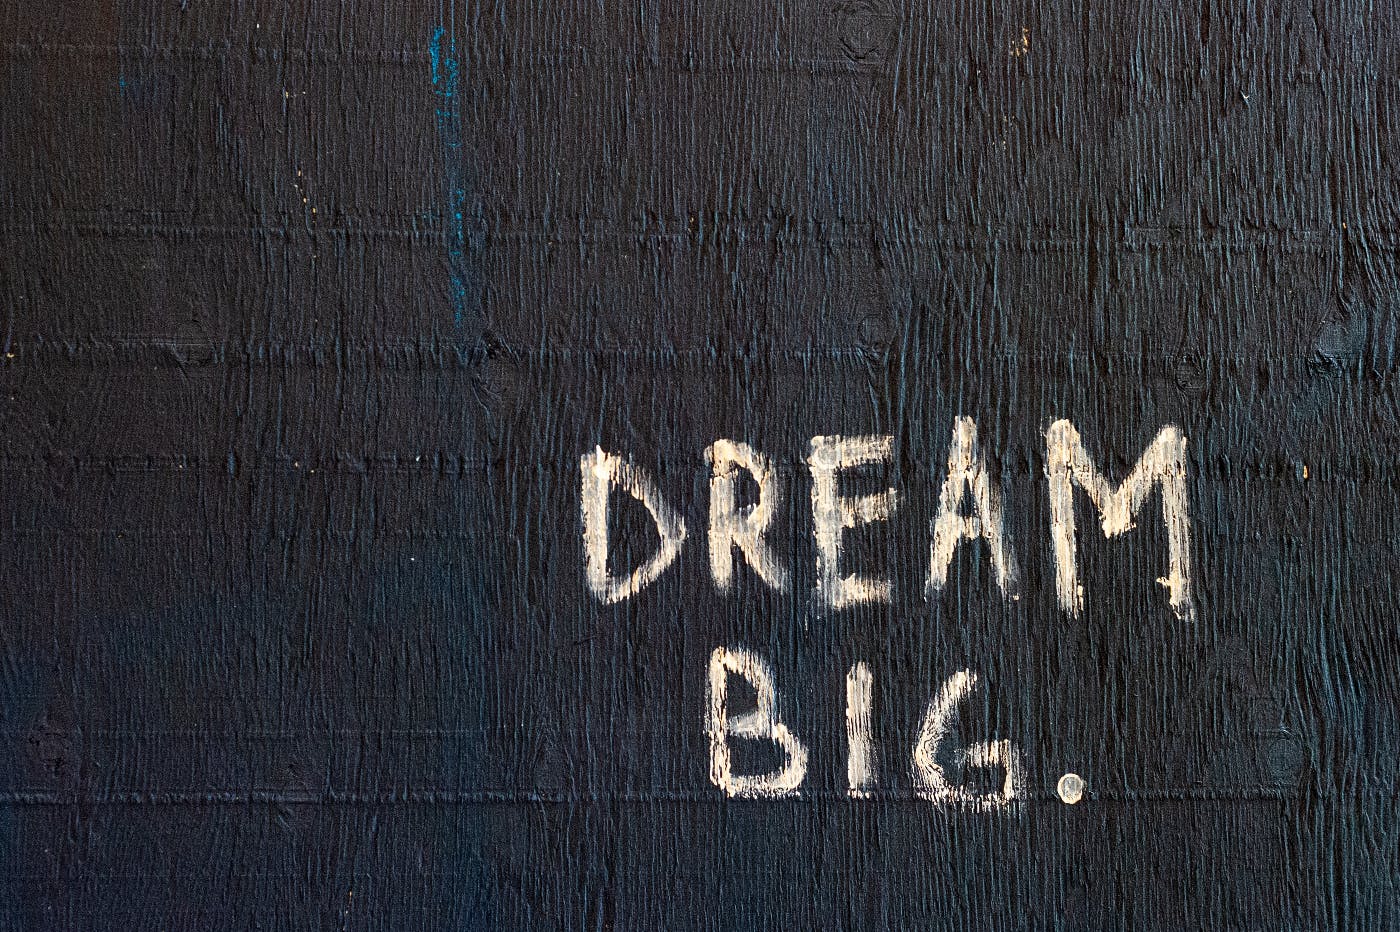 A highly textured black and blue wall with Dream Big painted on it